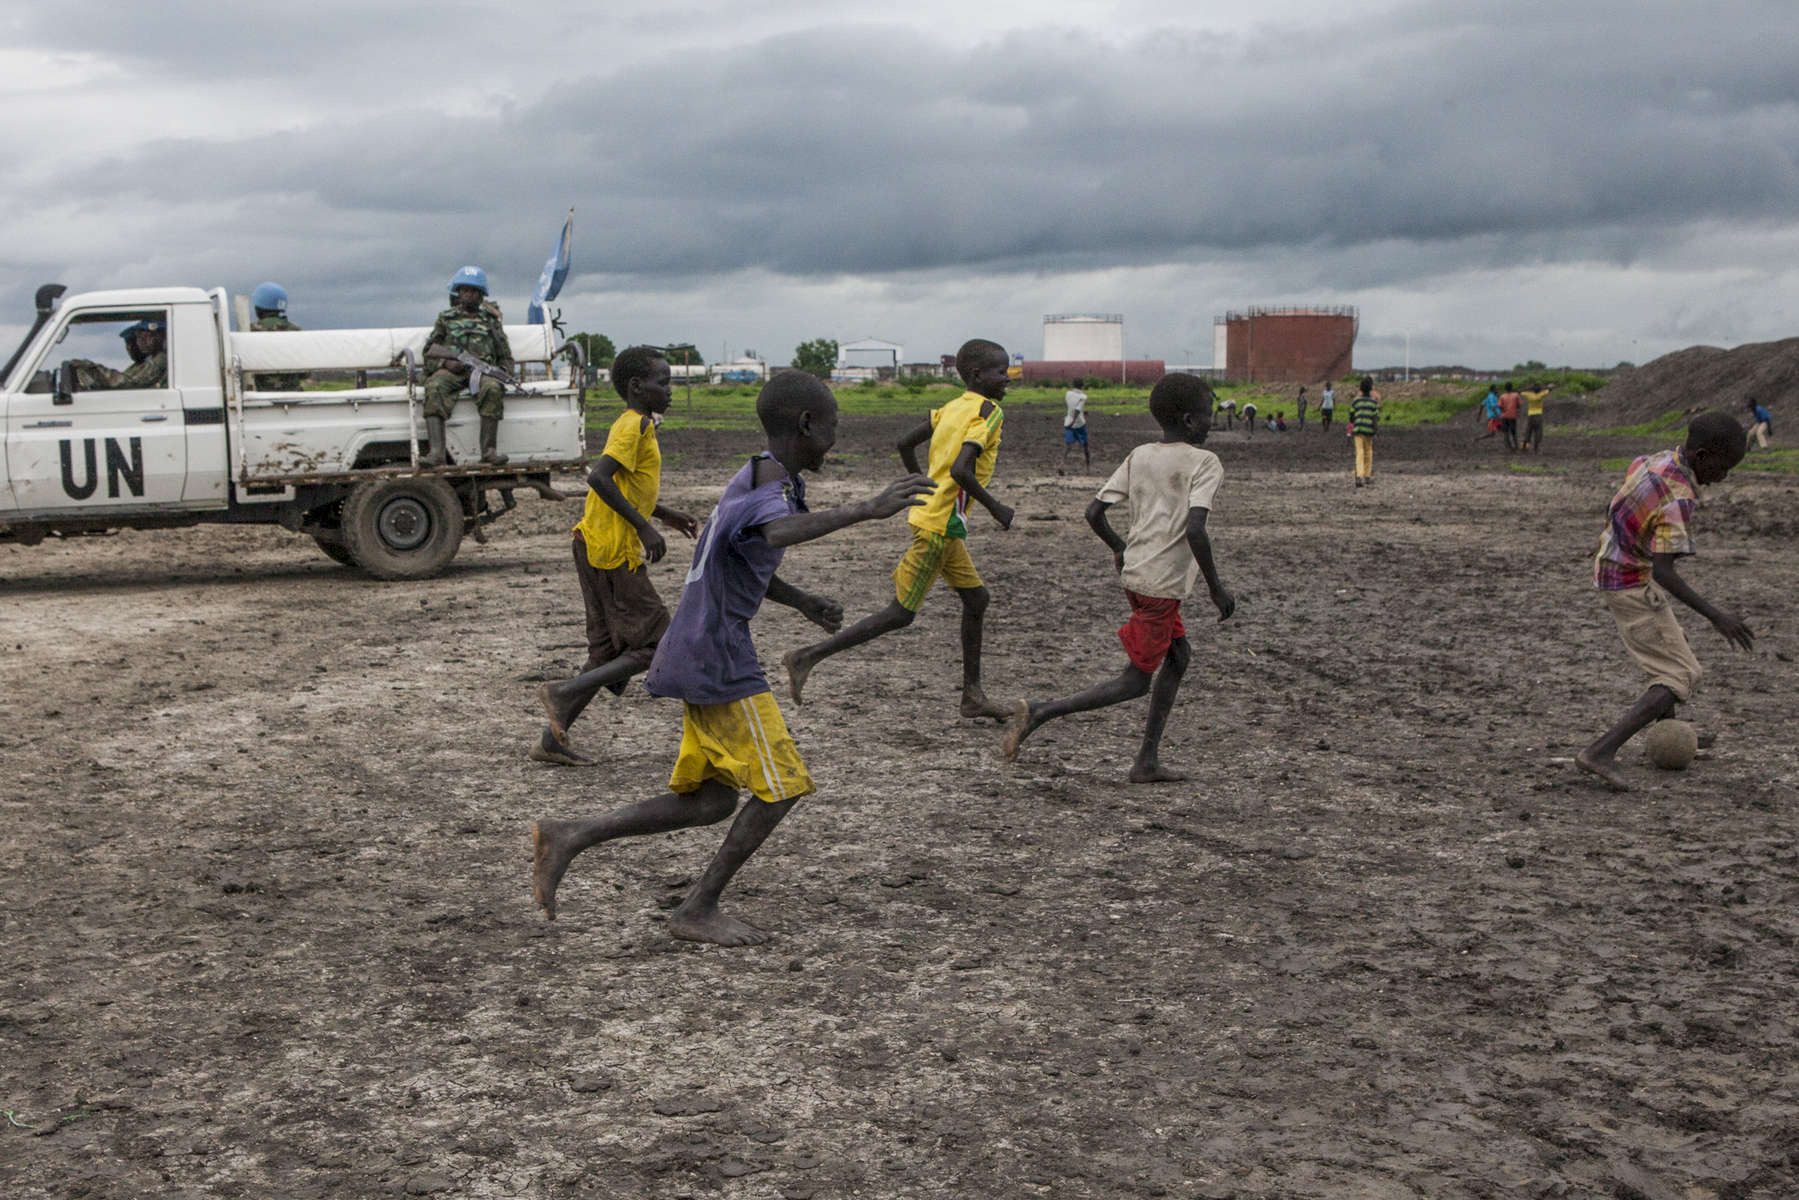 Boys play soccer in front of UN Peacekeepers at the Protection of Civilians (POC) site at the United Nations Mission in South Sudan (UNMISS) compound in Malakal, South Sudan on Wednesday, July 13, 2016. The Malakal POC site houses over 32,000 displaced people mainly from the Shilluk and Nuer tribes. In February of this year, members of the Dinka tribe, who resided in the camp at the time, carried out a coordinated attack within the site leading to the destruction of hundreds of shelters and many deaths. Since then, most members of the Dinka tribe have fled to Malakal town where they occupy the homes of those still displaced. 